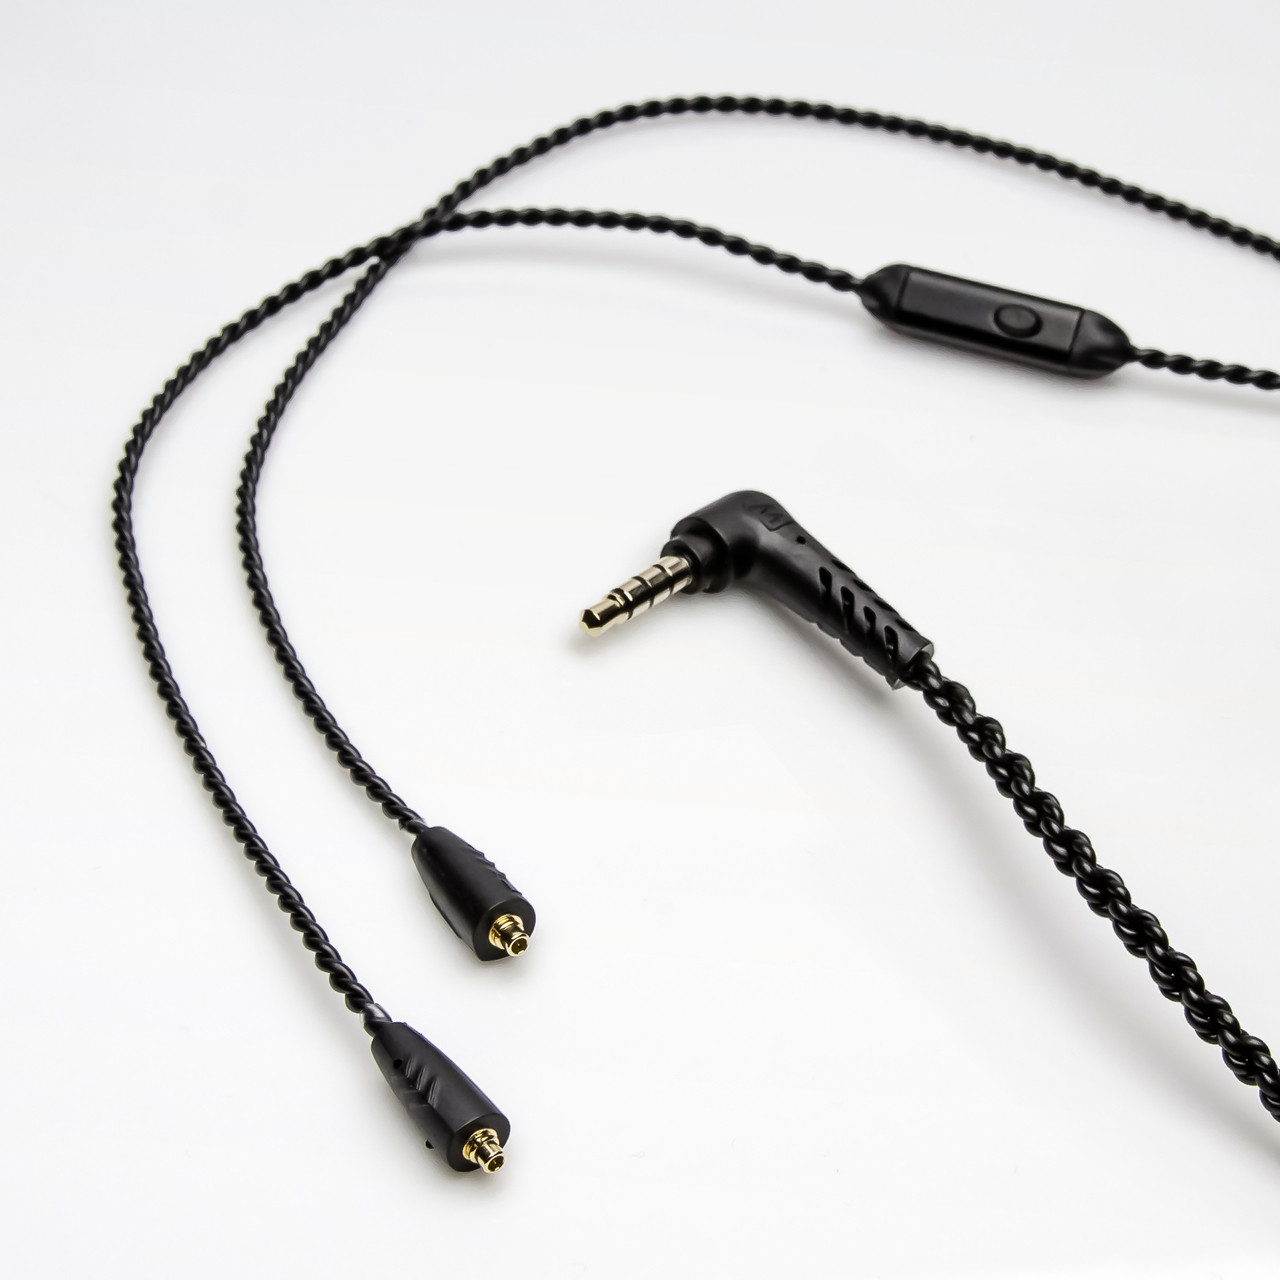 MMCX Replacement Headset Cable with In-line Remote and Microphone (Black)  (new version) - MEE audio